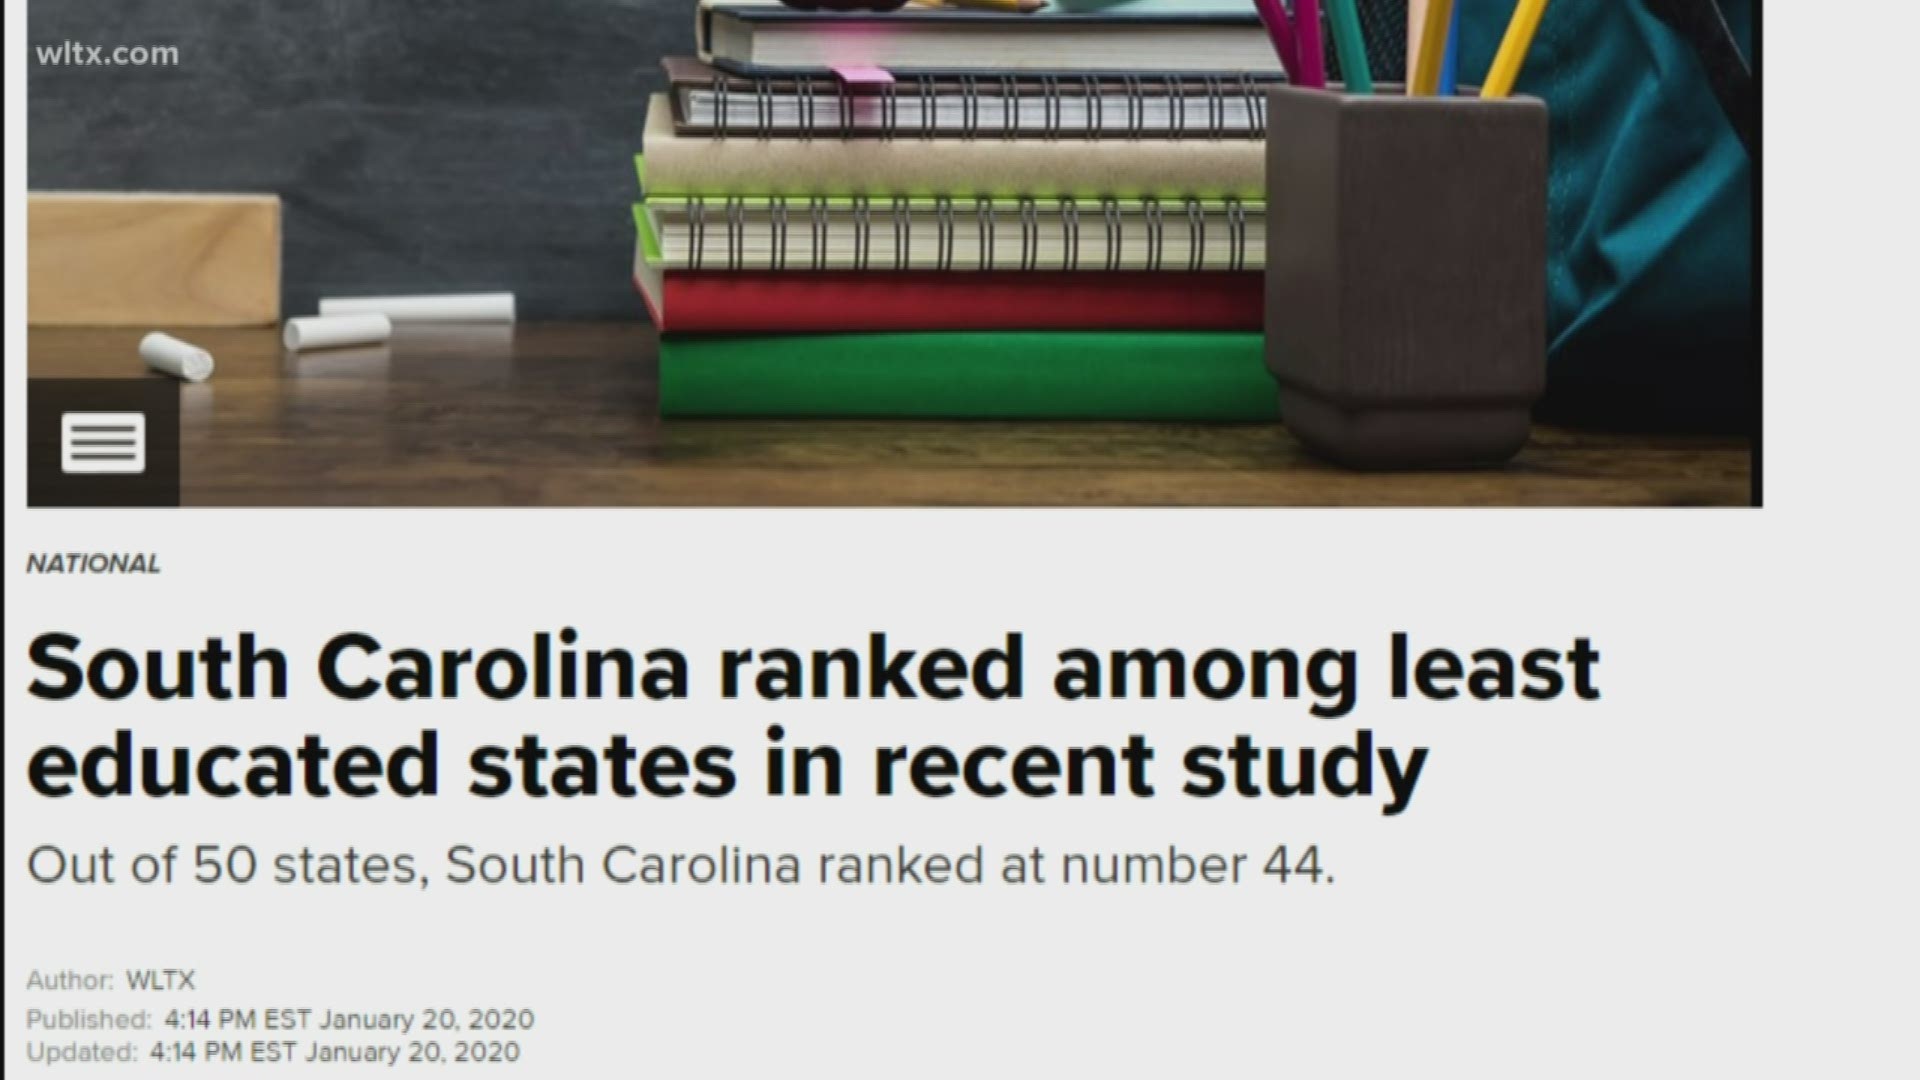 Out of 50 states, South Carolina ranked at number 44.